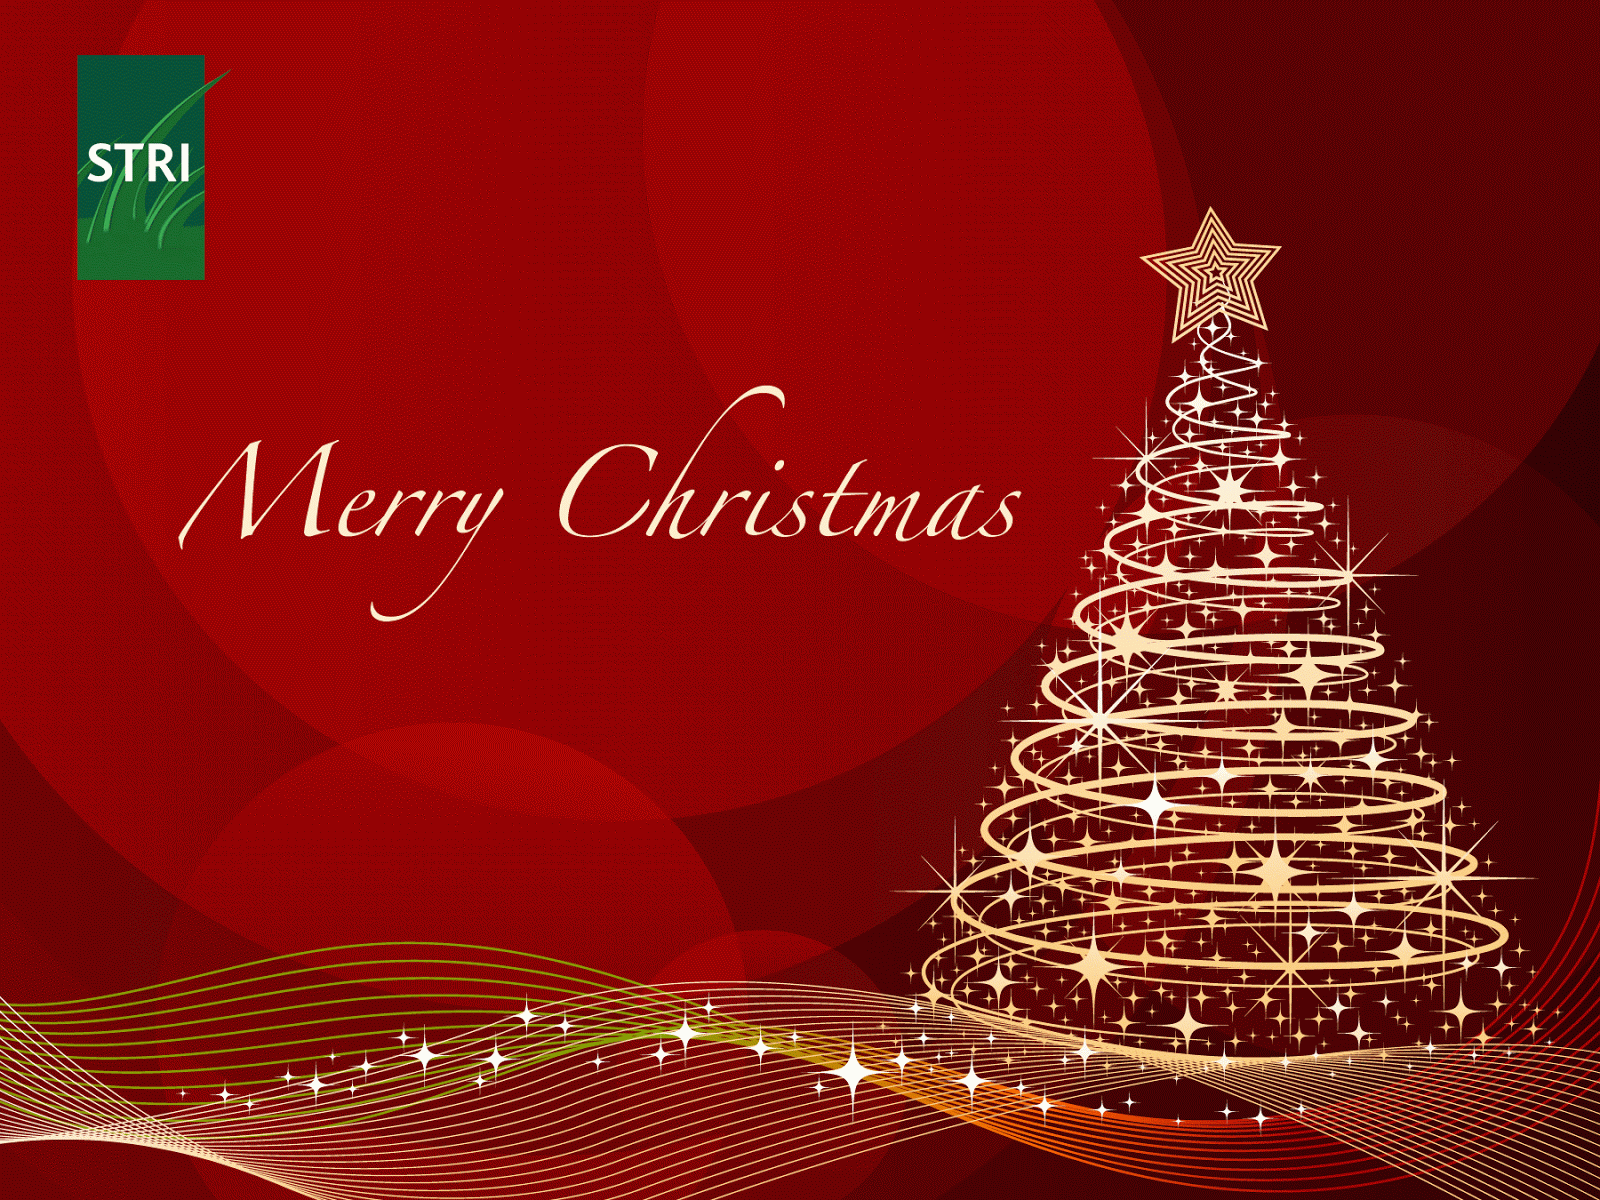 Merry Christmas Animated Gif Wallpaper With Gif On - Animated Gif Christmas Greetings , HD Wallpaper & Backgrounds